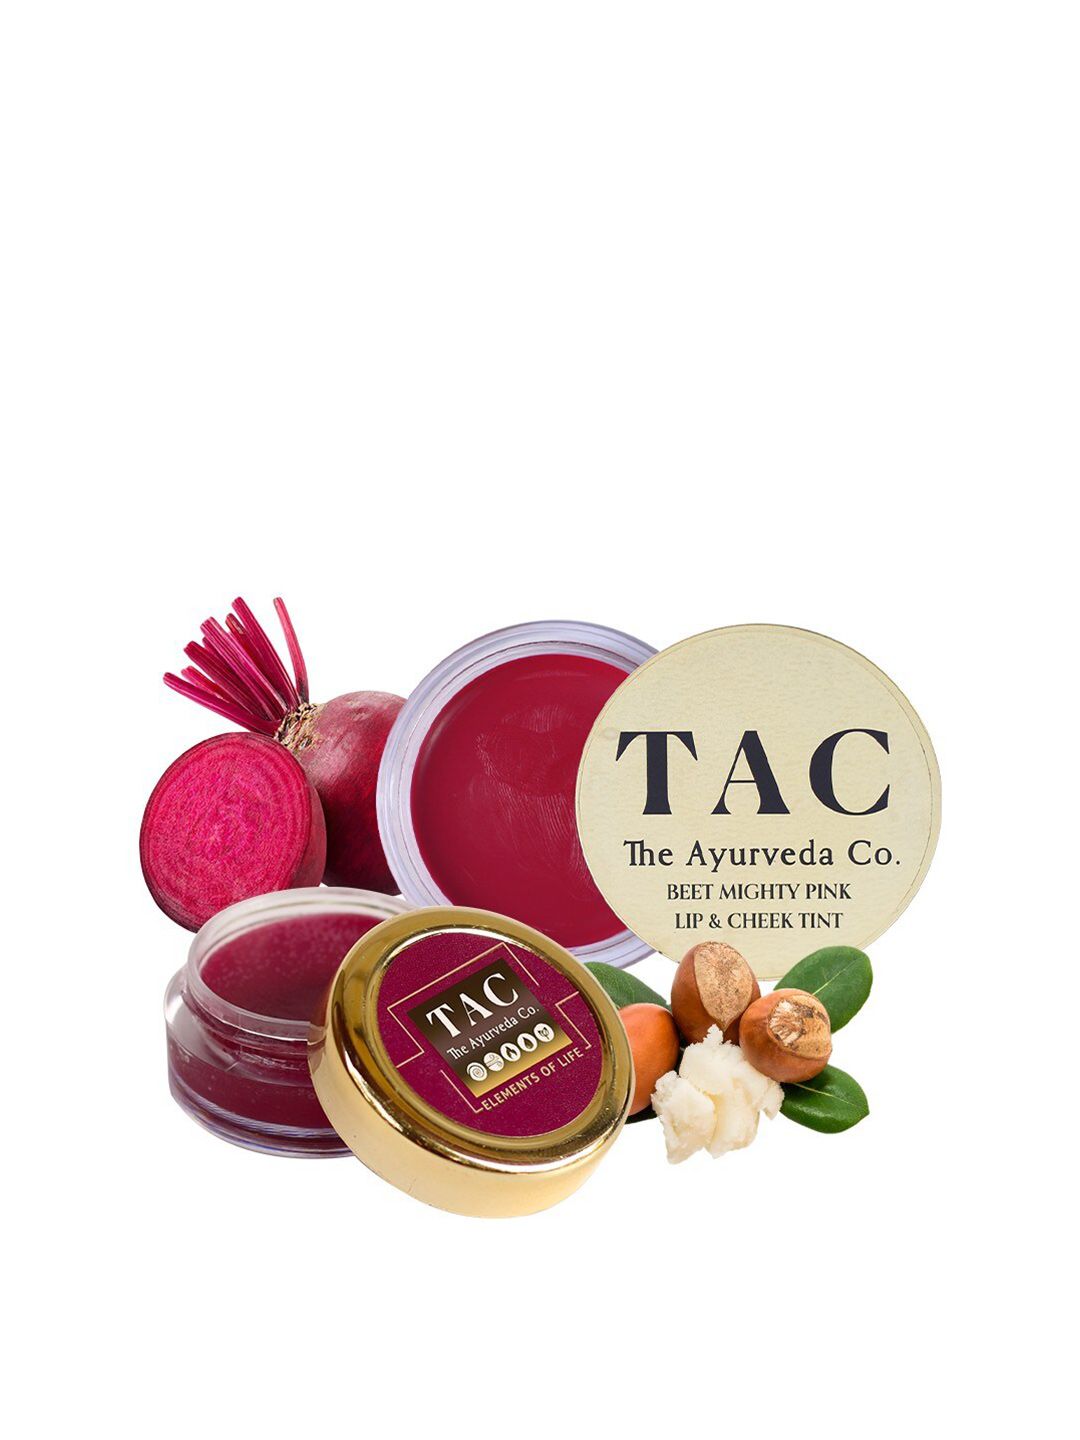 TAC - The Ayurveda Co. Beetroot Lip & Cheek Tint and Buttered Lip Balm with Shea Butter Price in India